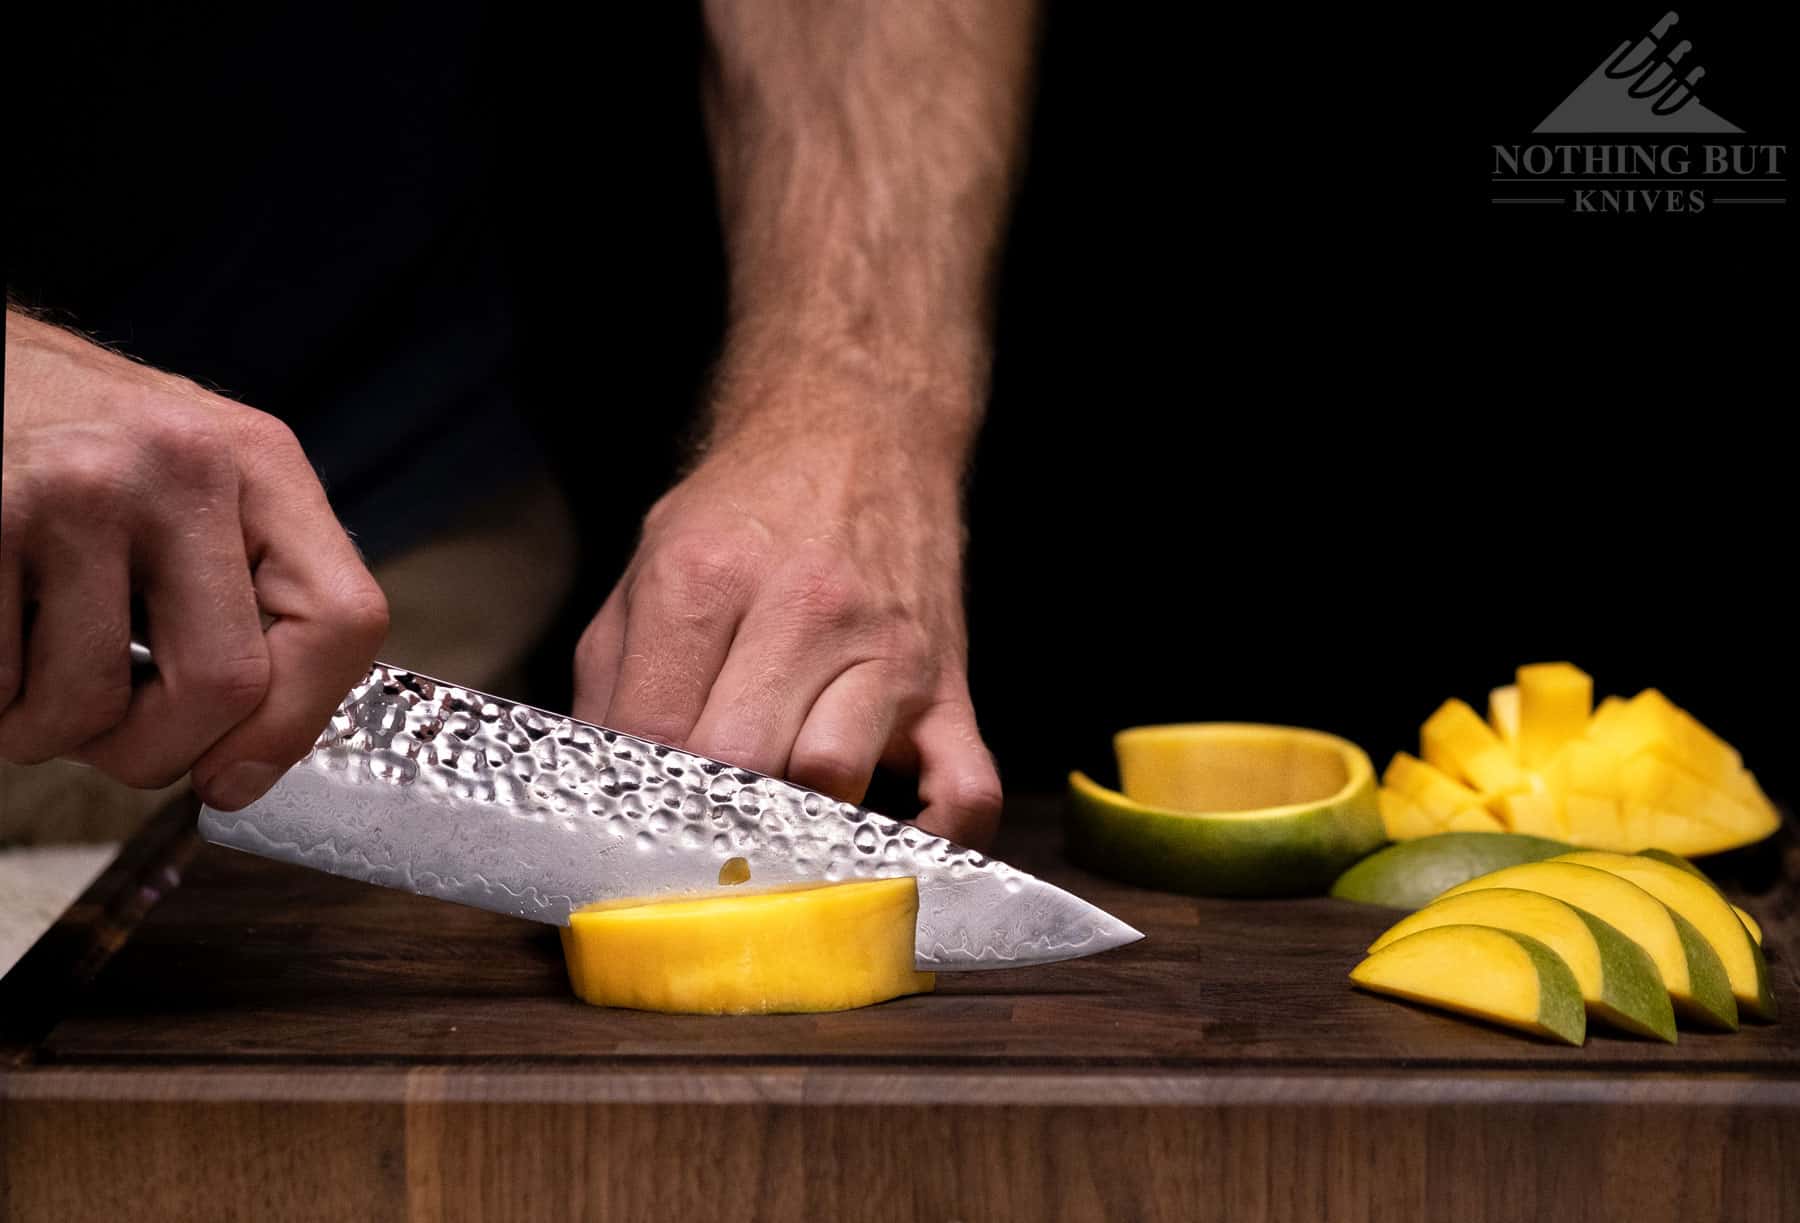 This image shows that the Shun Premier can cut through the hard core of a cantaloupe, but it should be done carefully to avoid damaging the blade.  